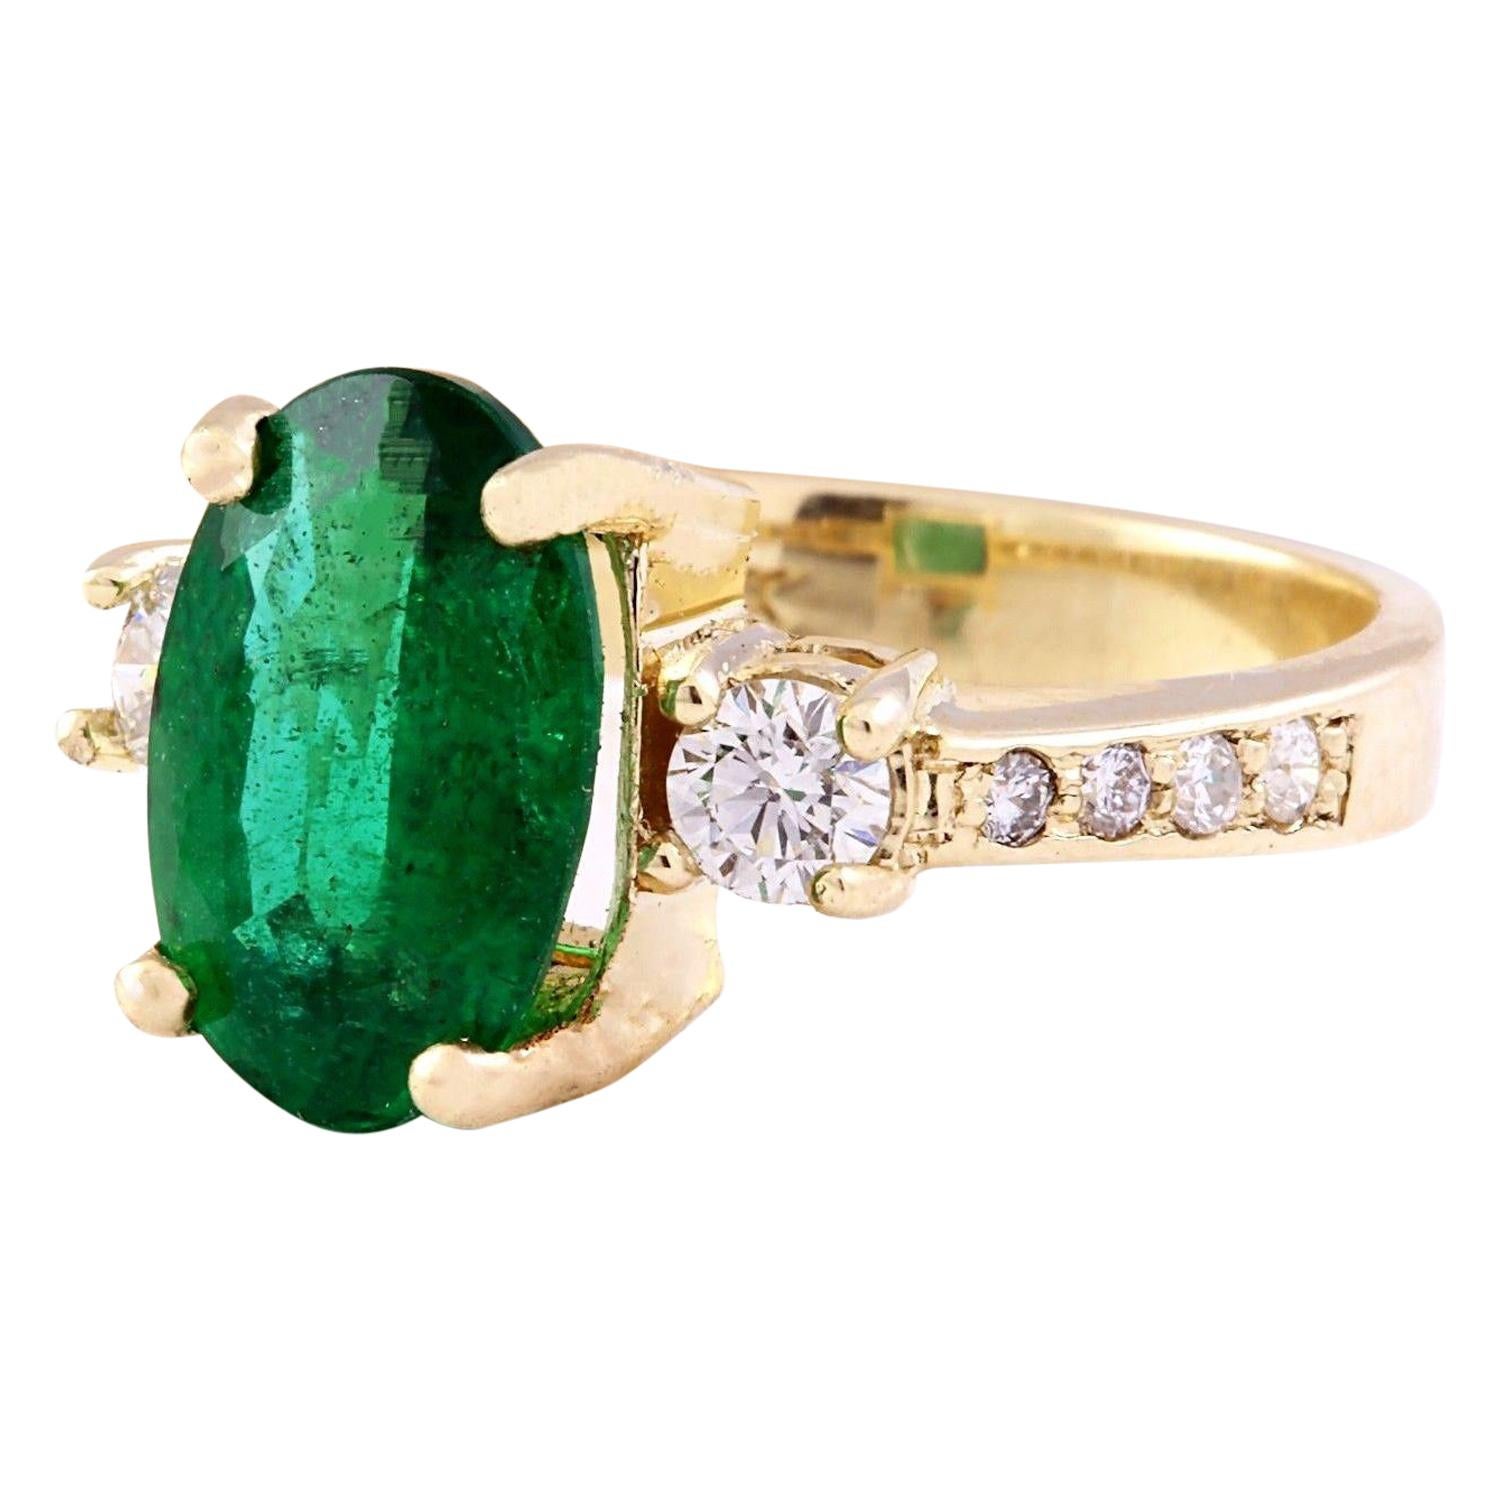 4.60 Carat Natural Emerald 14K Solid Yellow Gold Diamond Ring
 Item Type: Ring
 Item Style: Engagement
 Material: 14K Yellow Gold
 Mainstone: Emerald
 Stone Color: Green
 Stone Weight: 3.60 Carat
 Stone Shape: Oval
 Stone Quantity: 1
 Stone